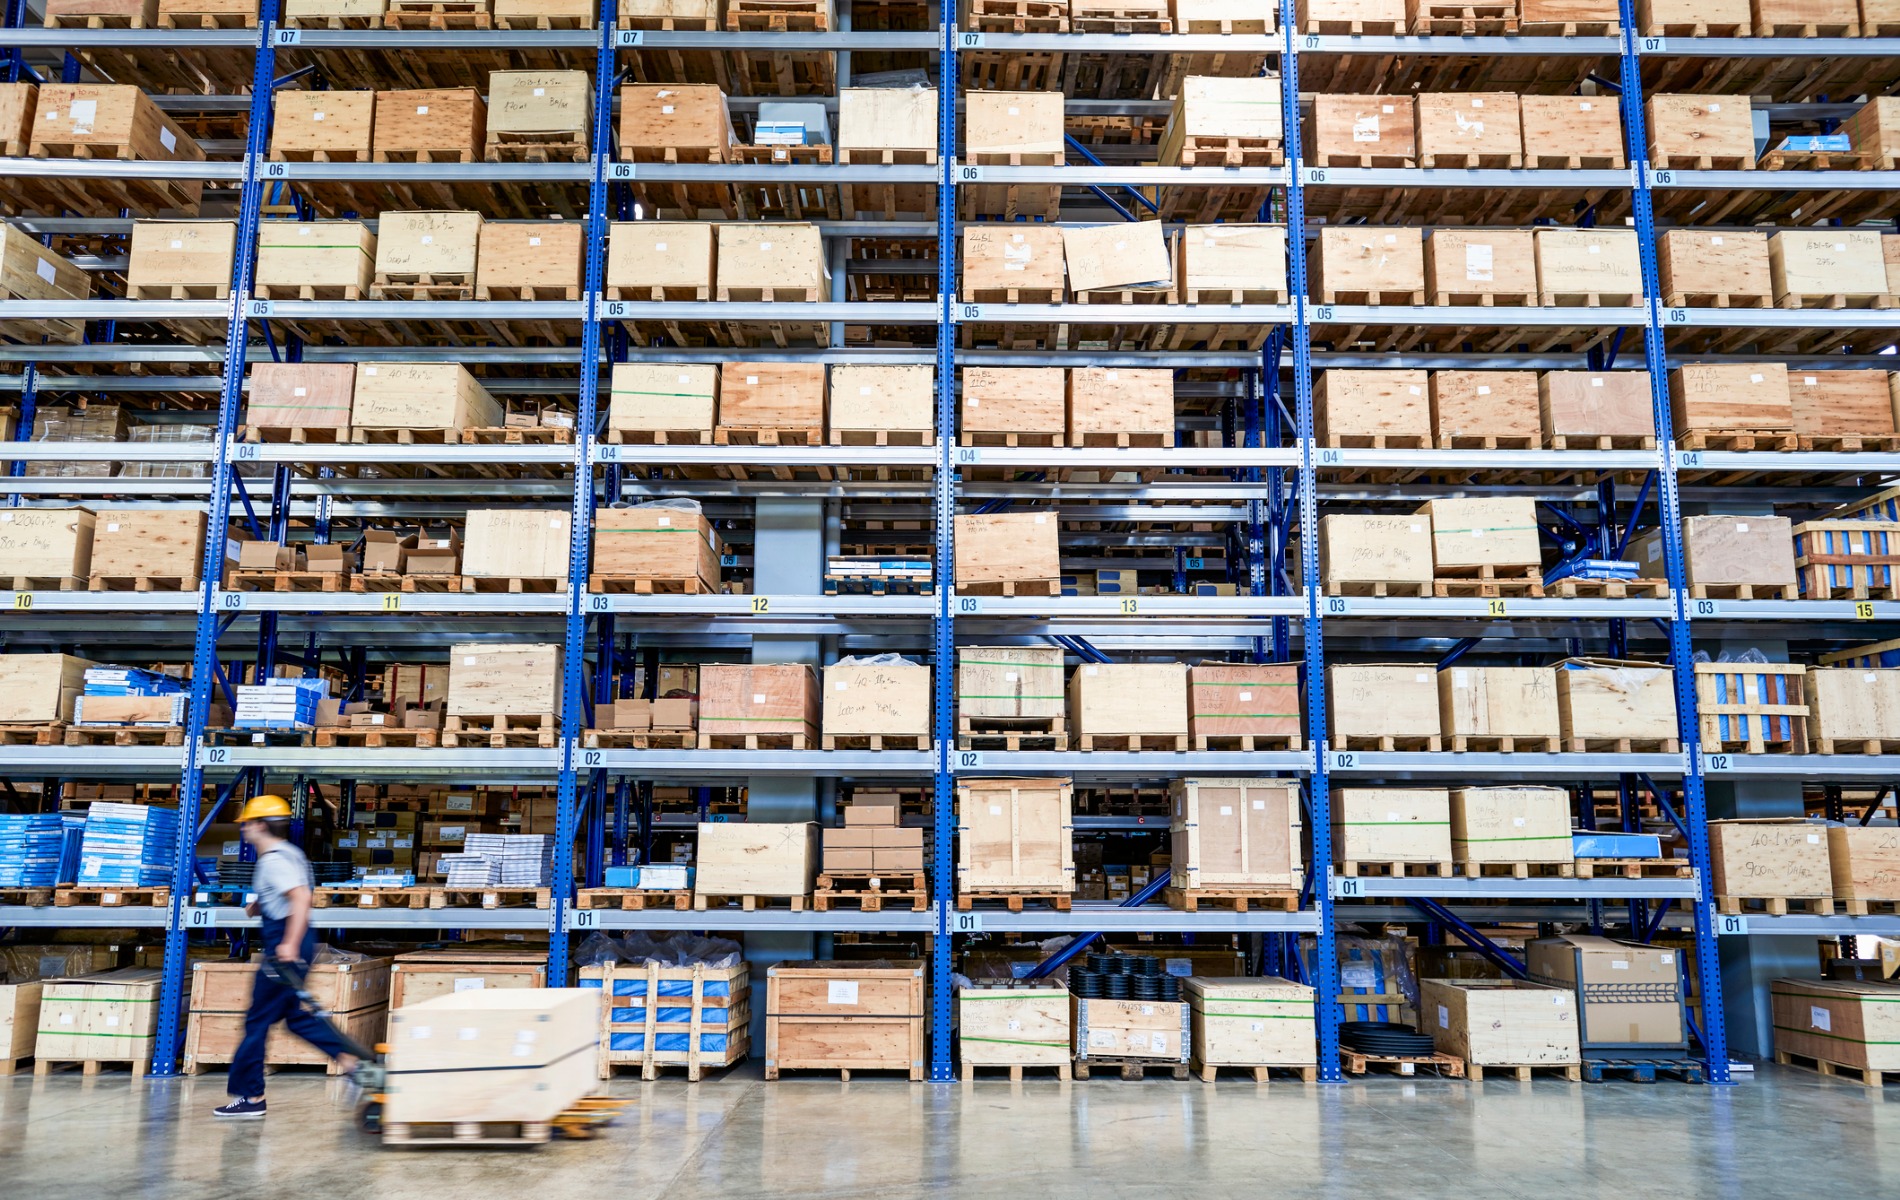 The Need for 1B+ Sq Ft of Warehouse Space, pt 2: Innovated Spaces